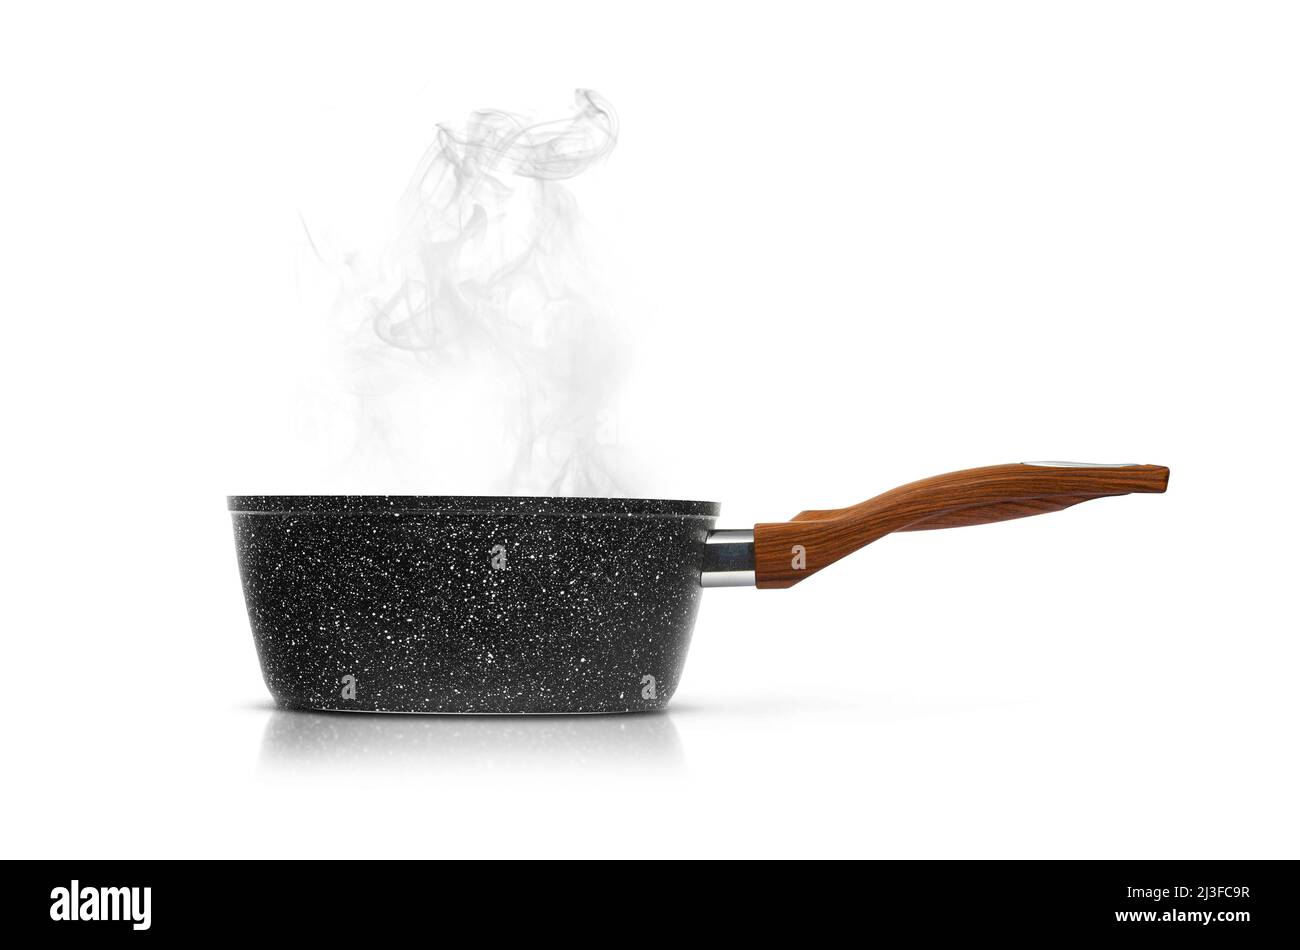 Modern frying pan with non-stick granite coating with hot steam coming out isolated on white background. Stock Photo